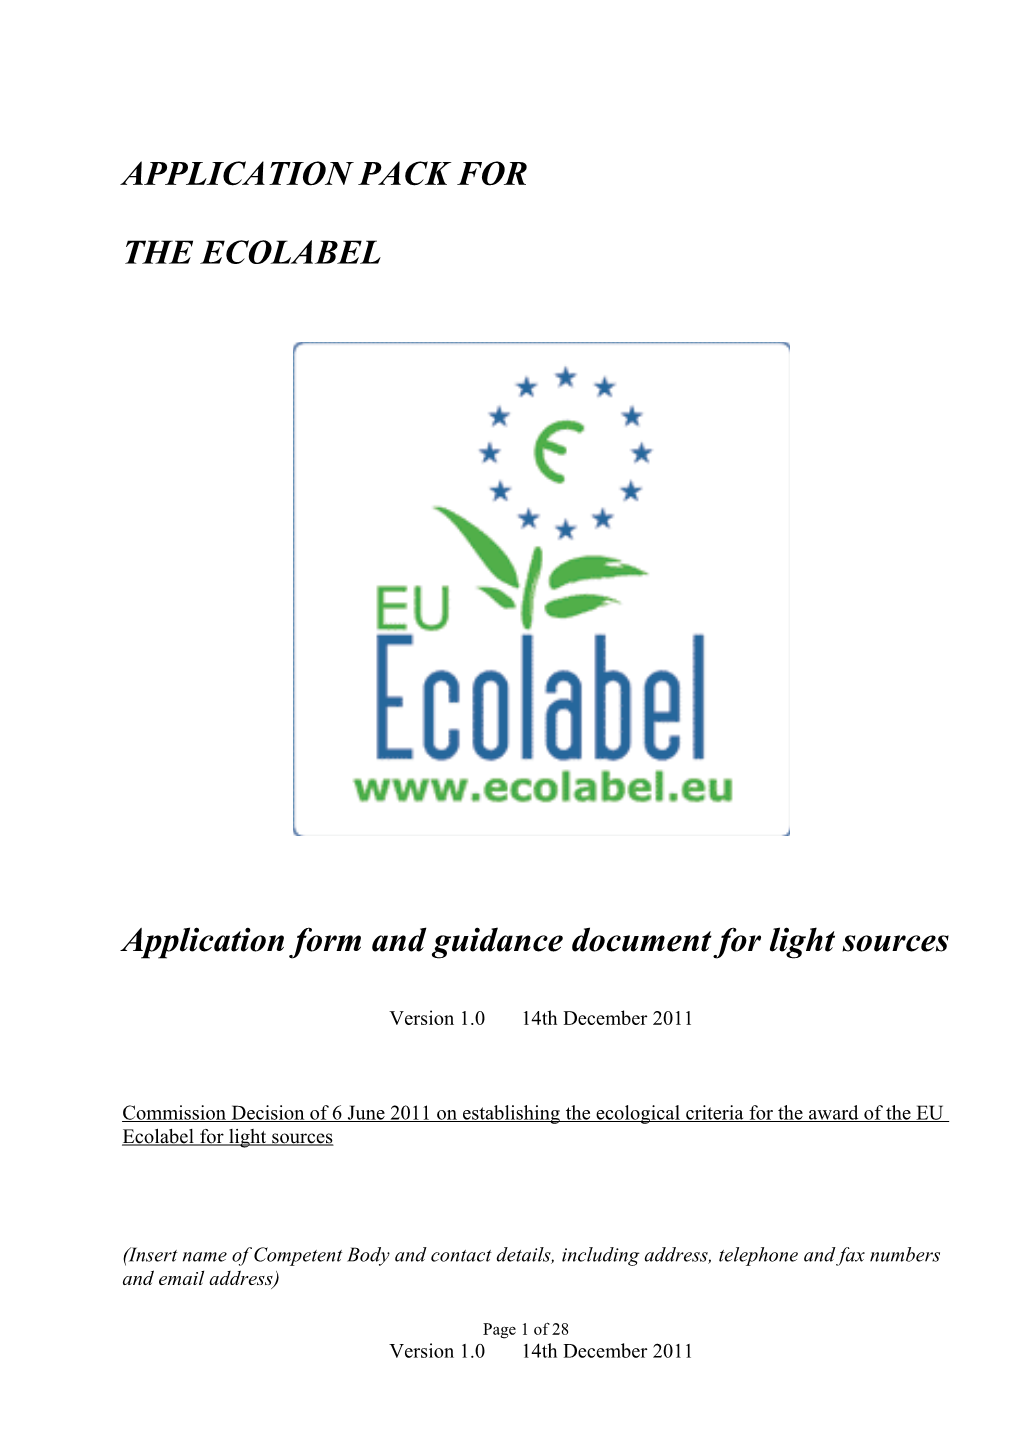 Application Pack for the Ecolabel